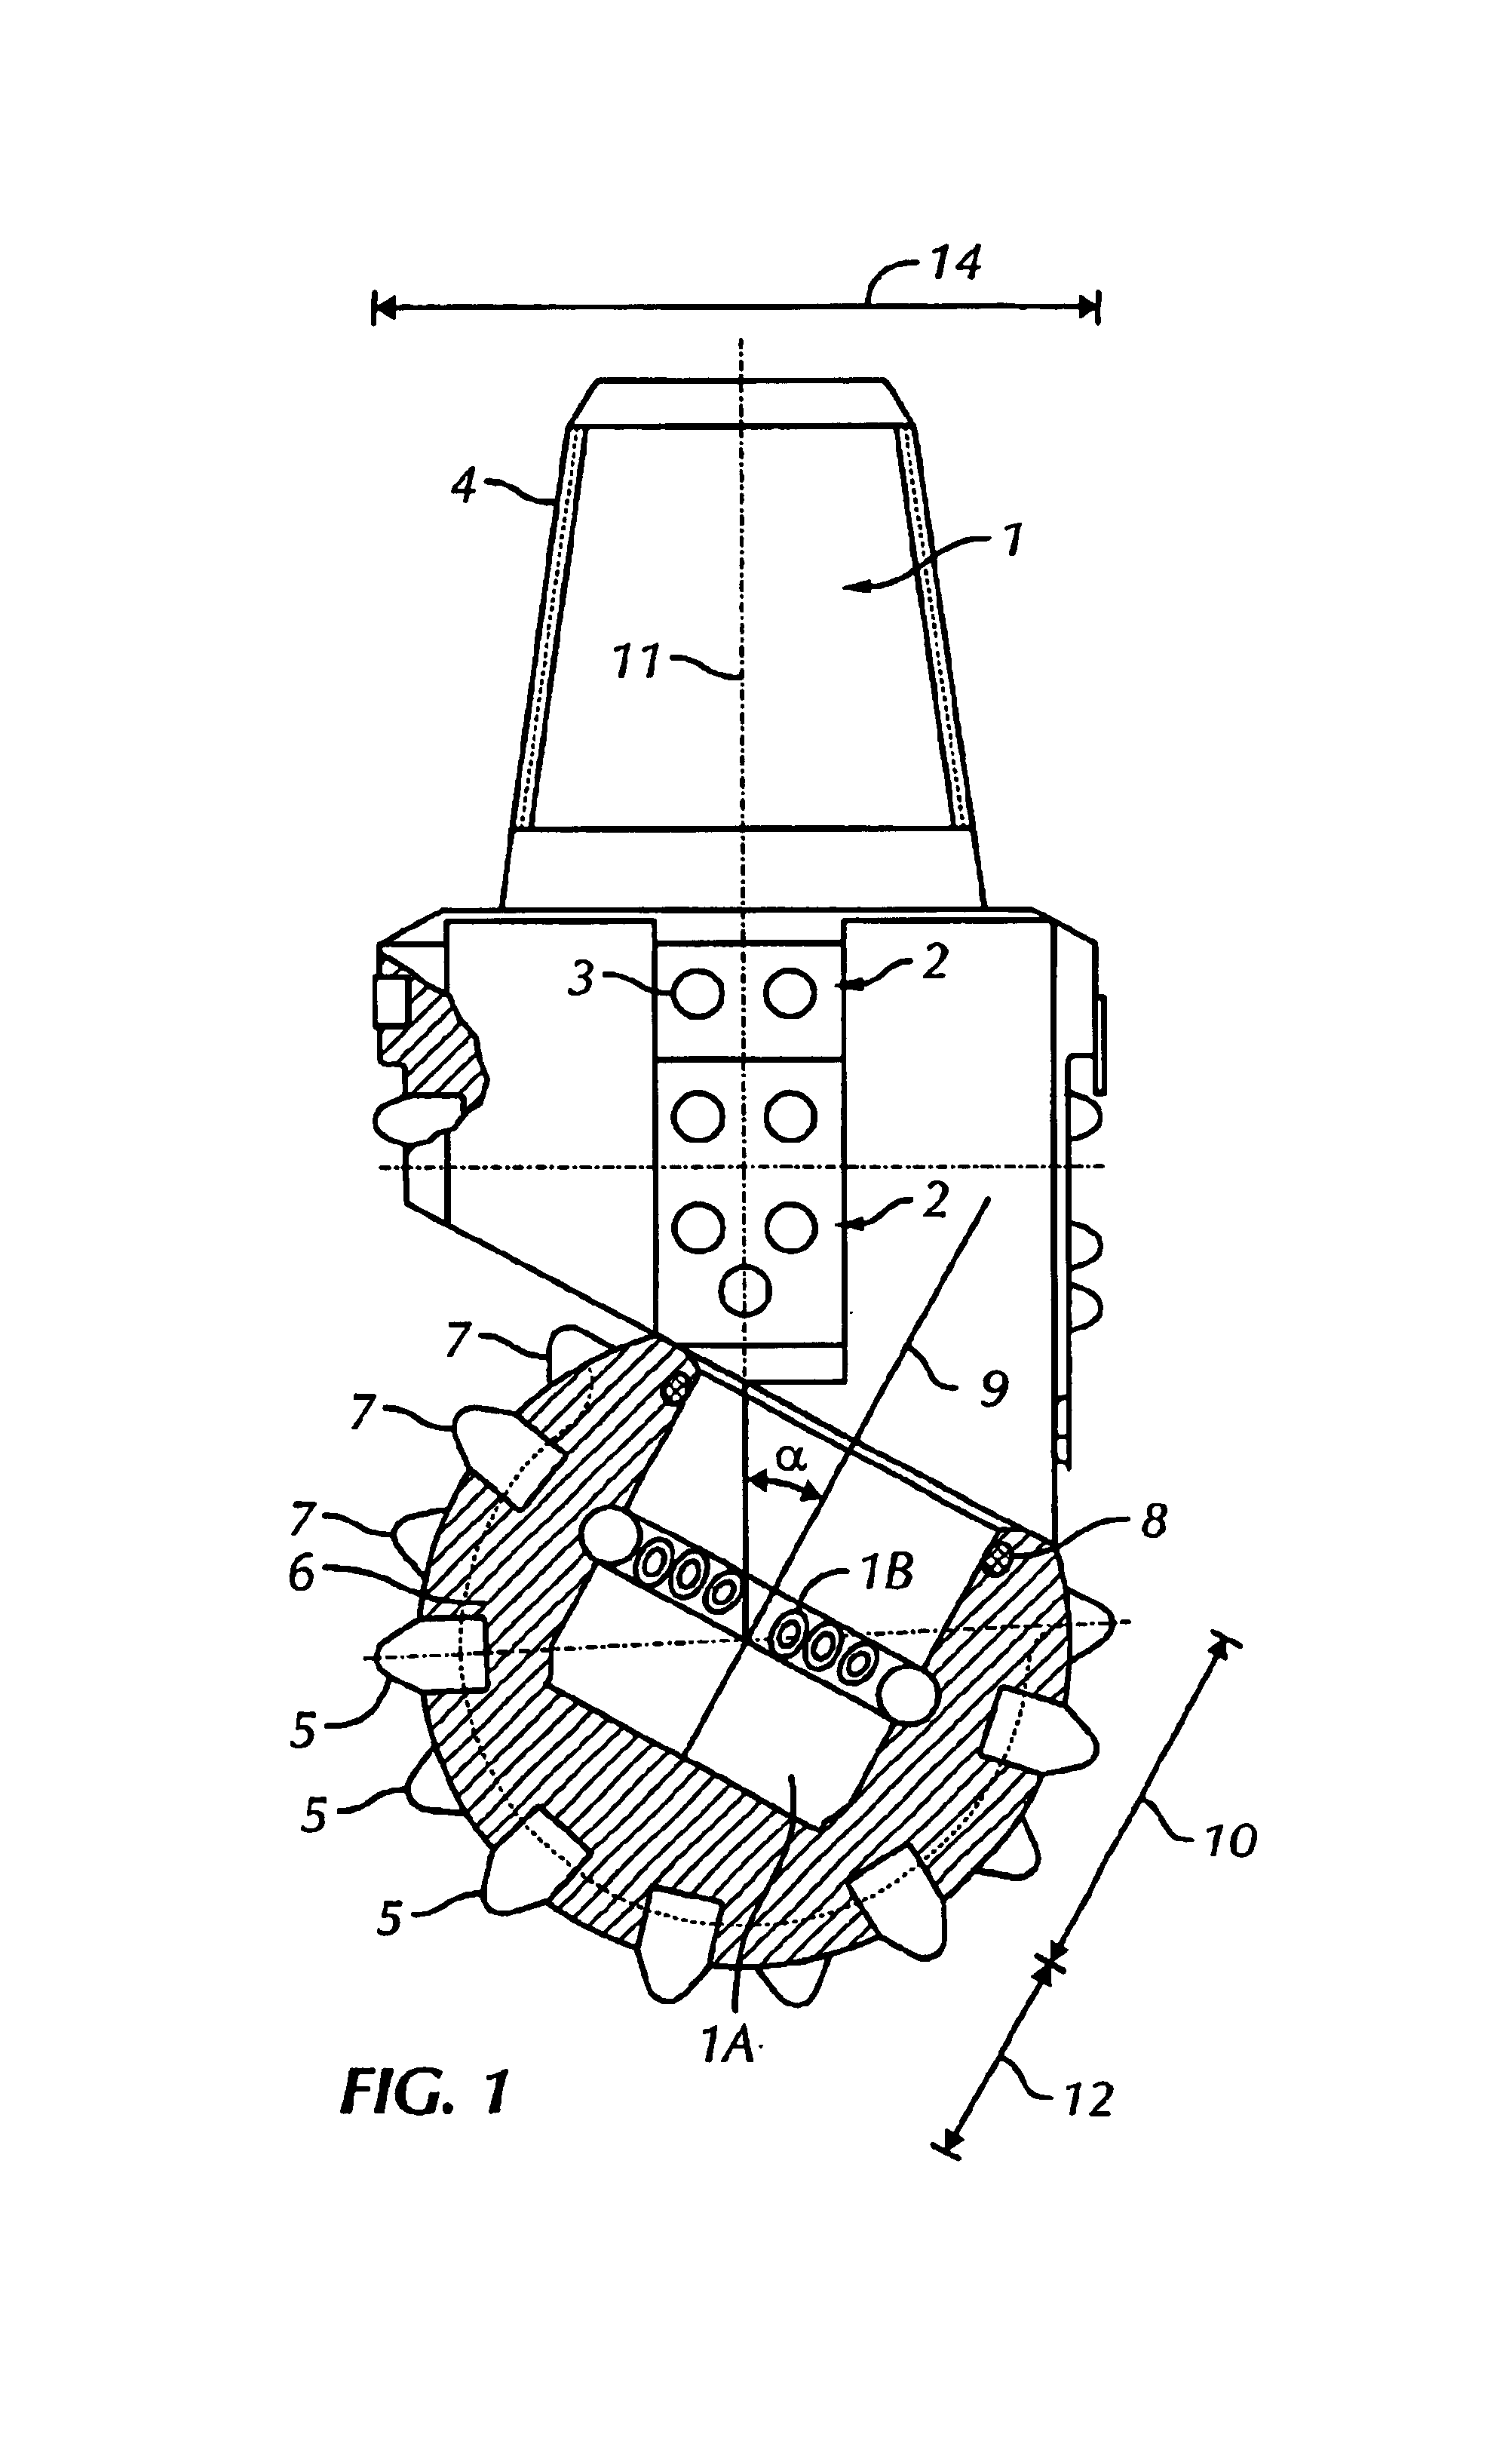 Single cone rock bit having inserts adapted to maintain hole gage during drilling